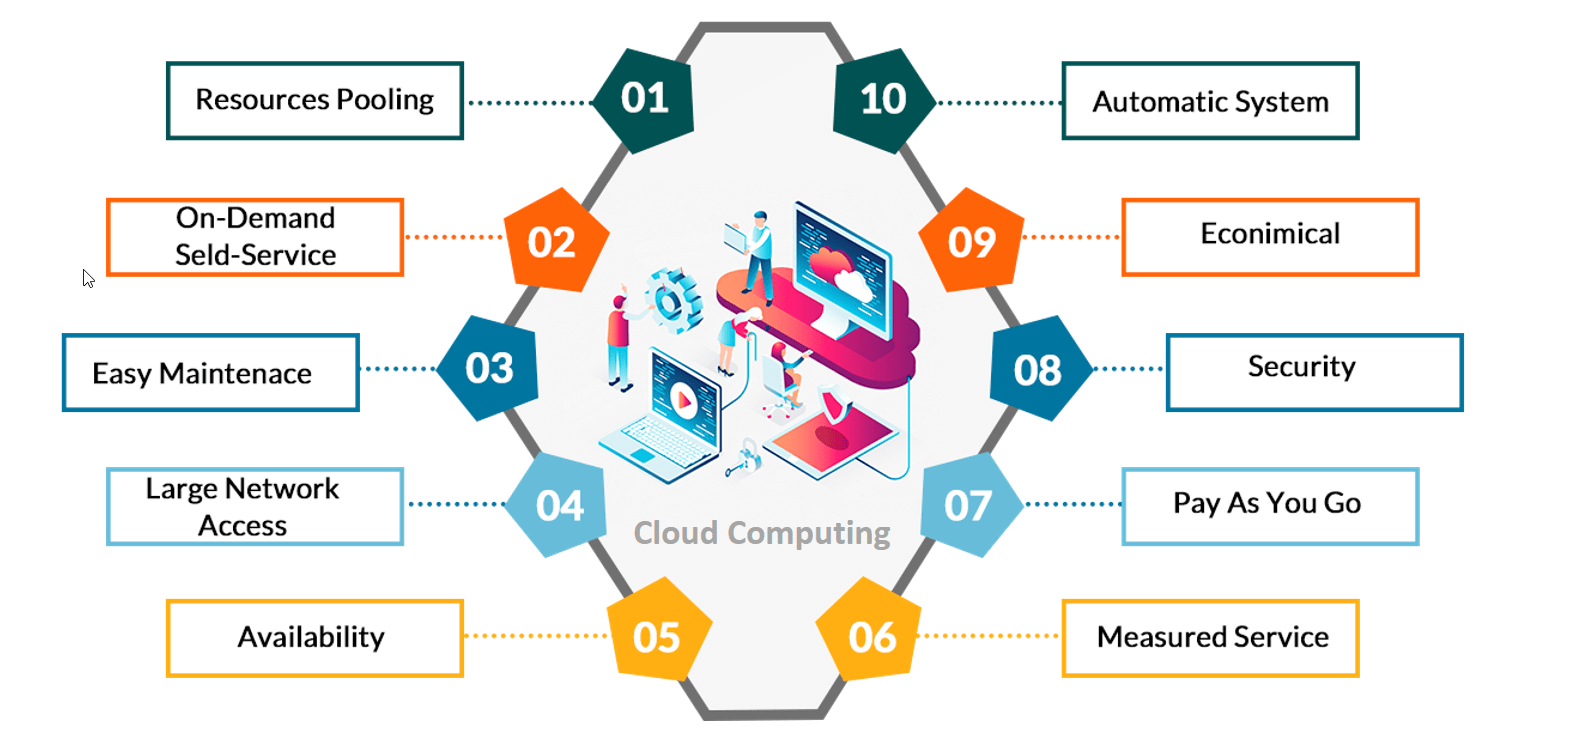 Cloud computing features